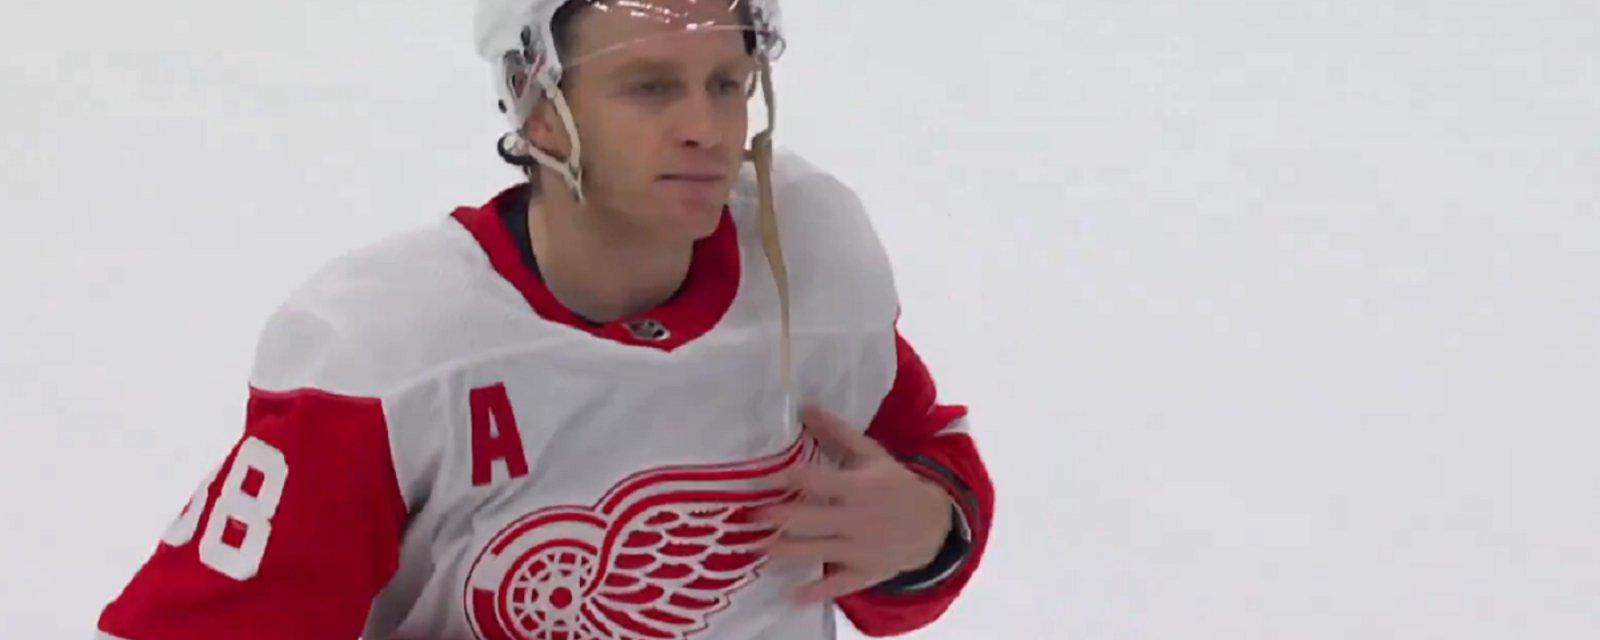 Patrick Kane has message for fans in Chicago after big win.